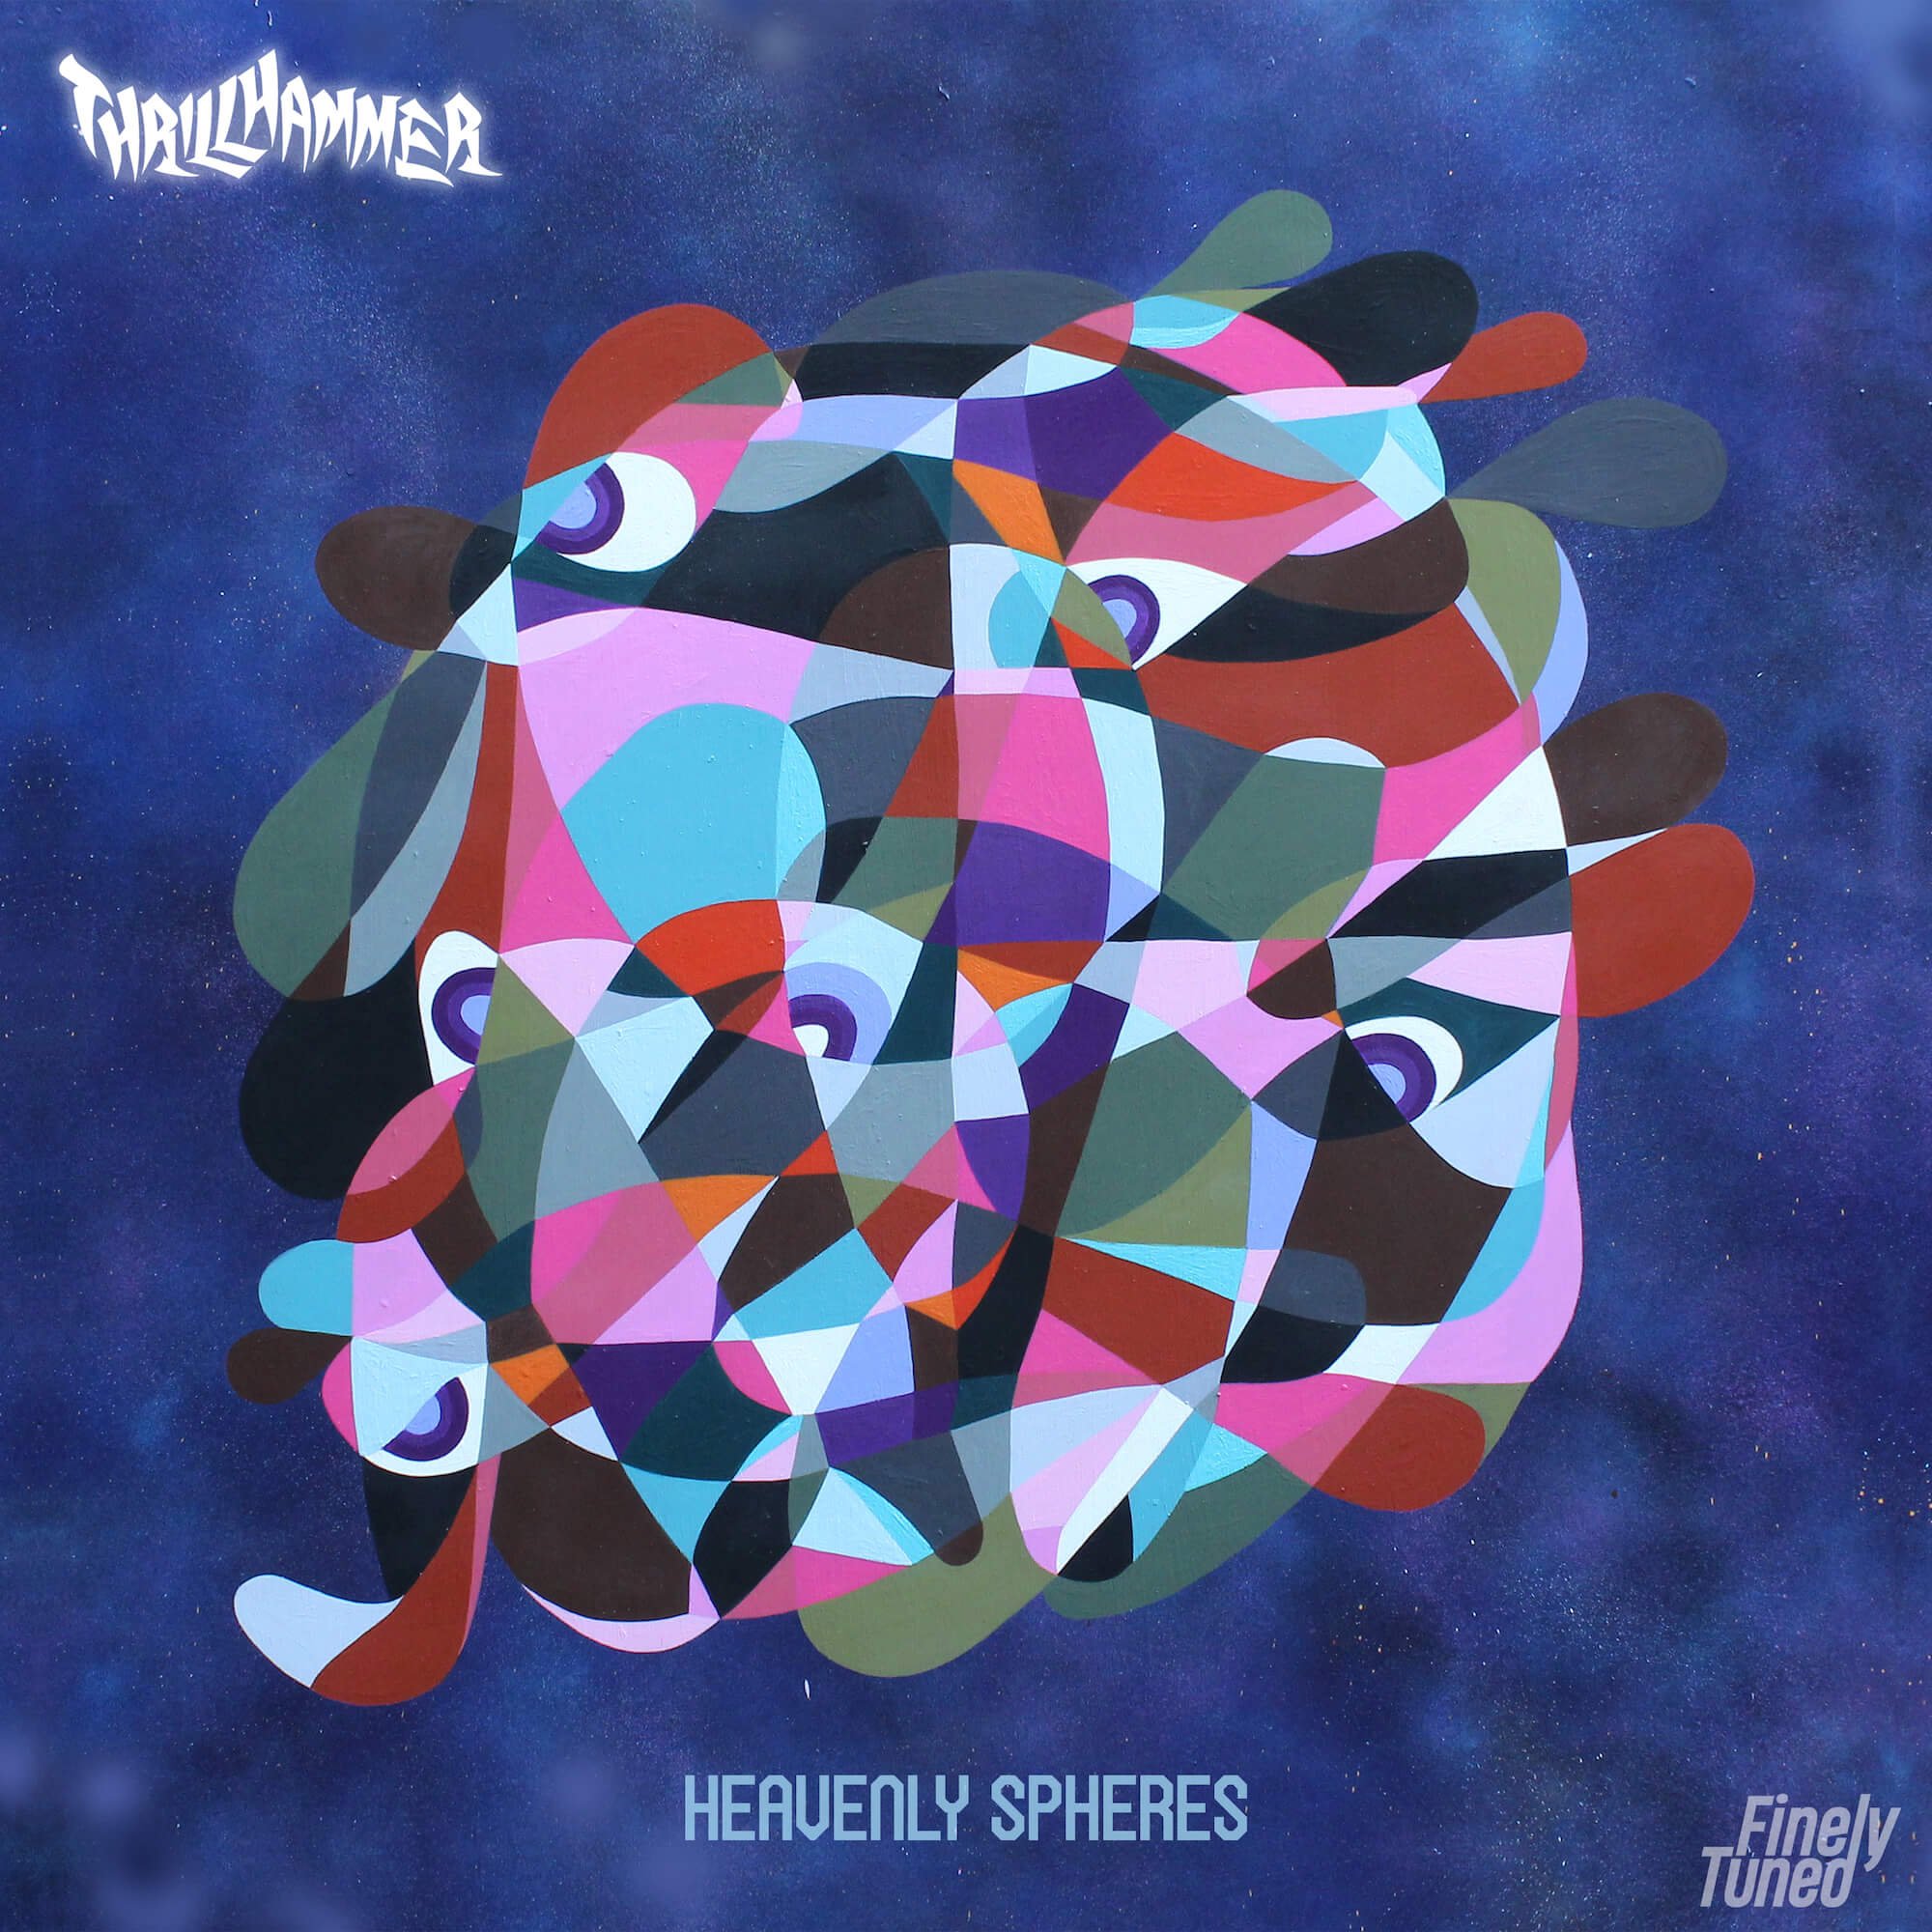 ThrillHammer - Heavenly Spheres (Finely Tuned)